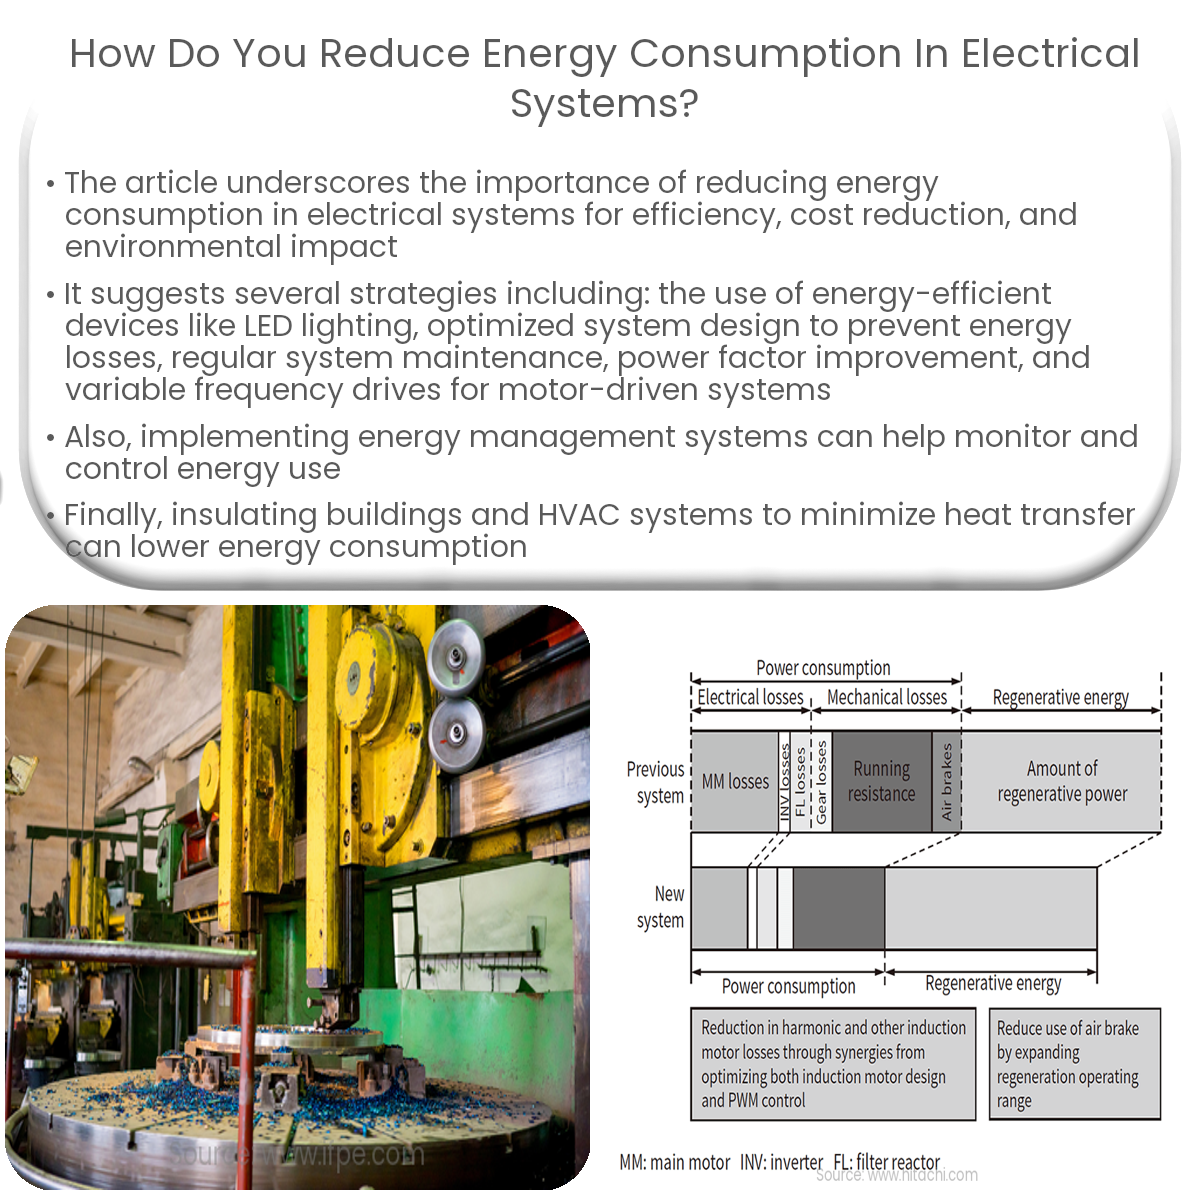 How do you reduce energy consumption in electrical systems?